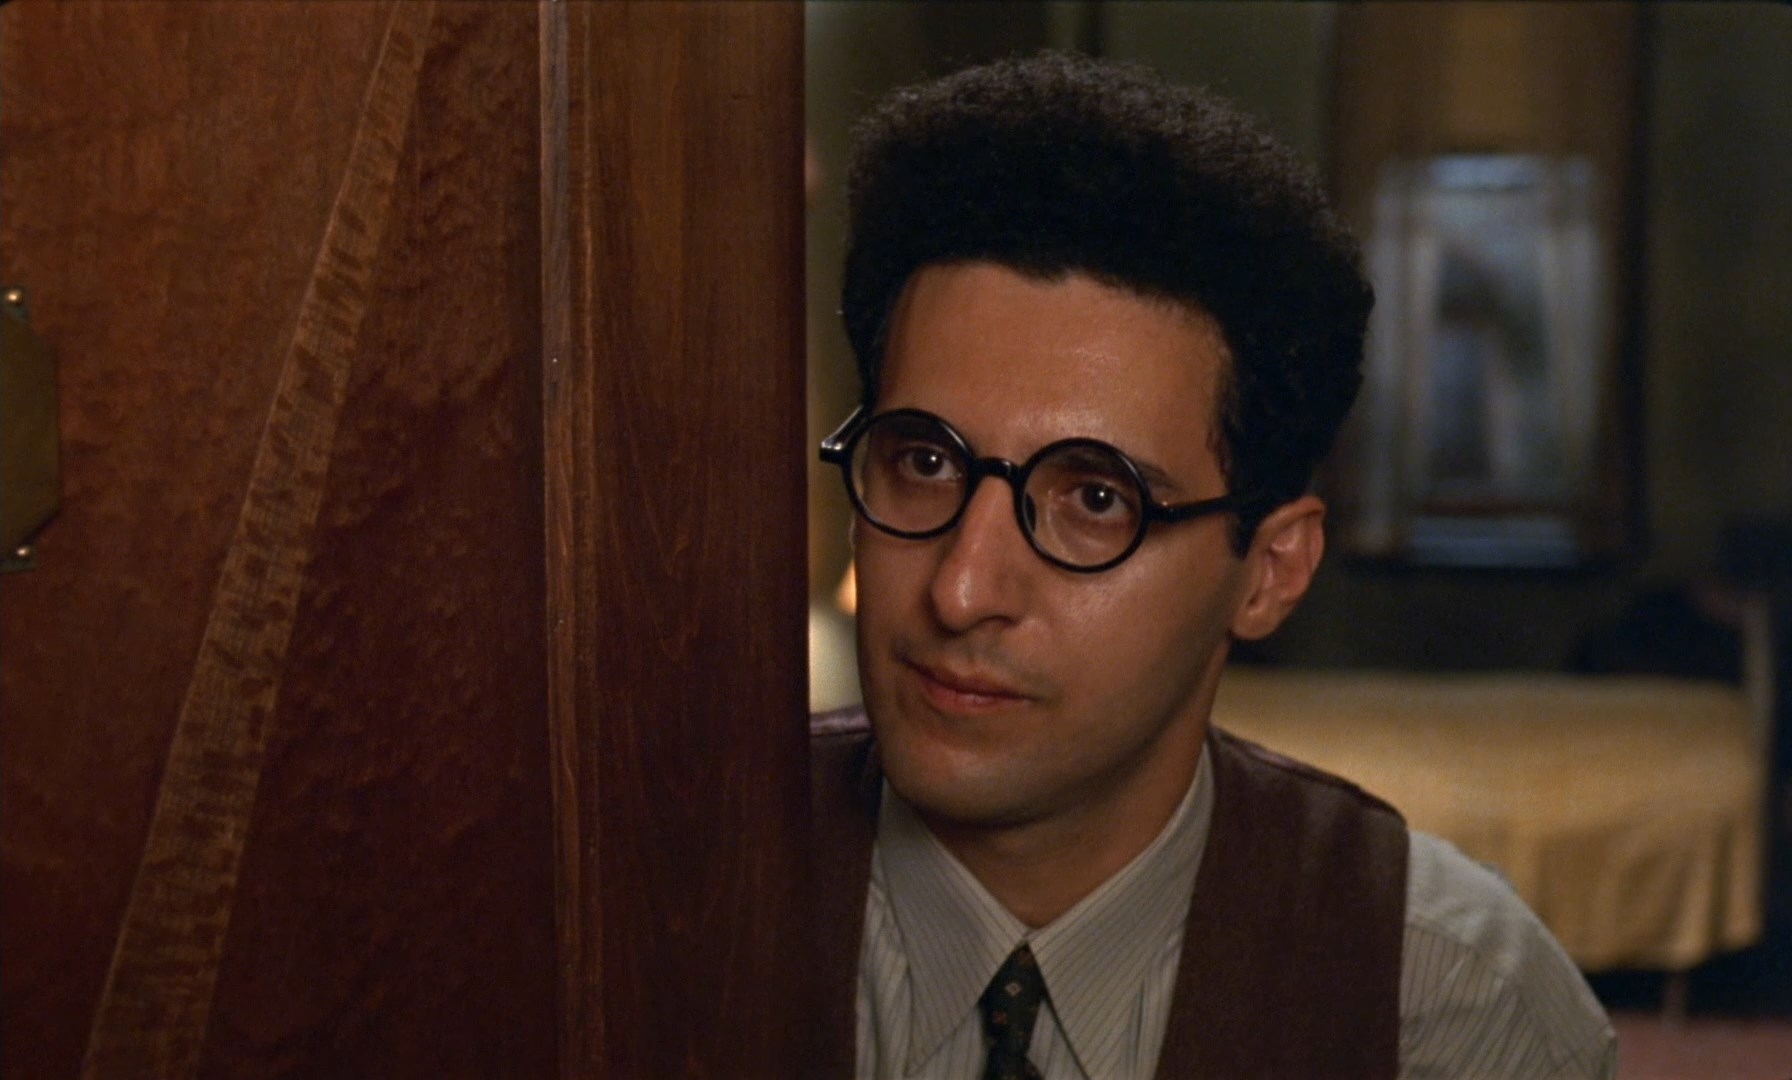 barton fink meaning